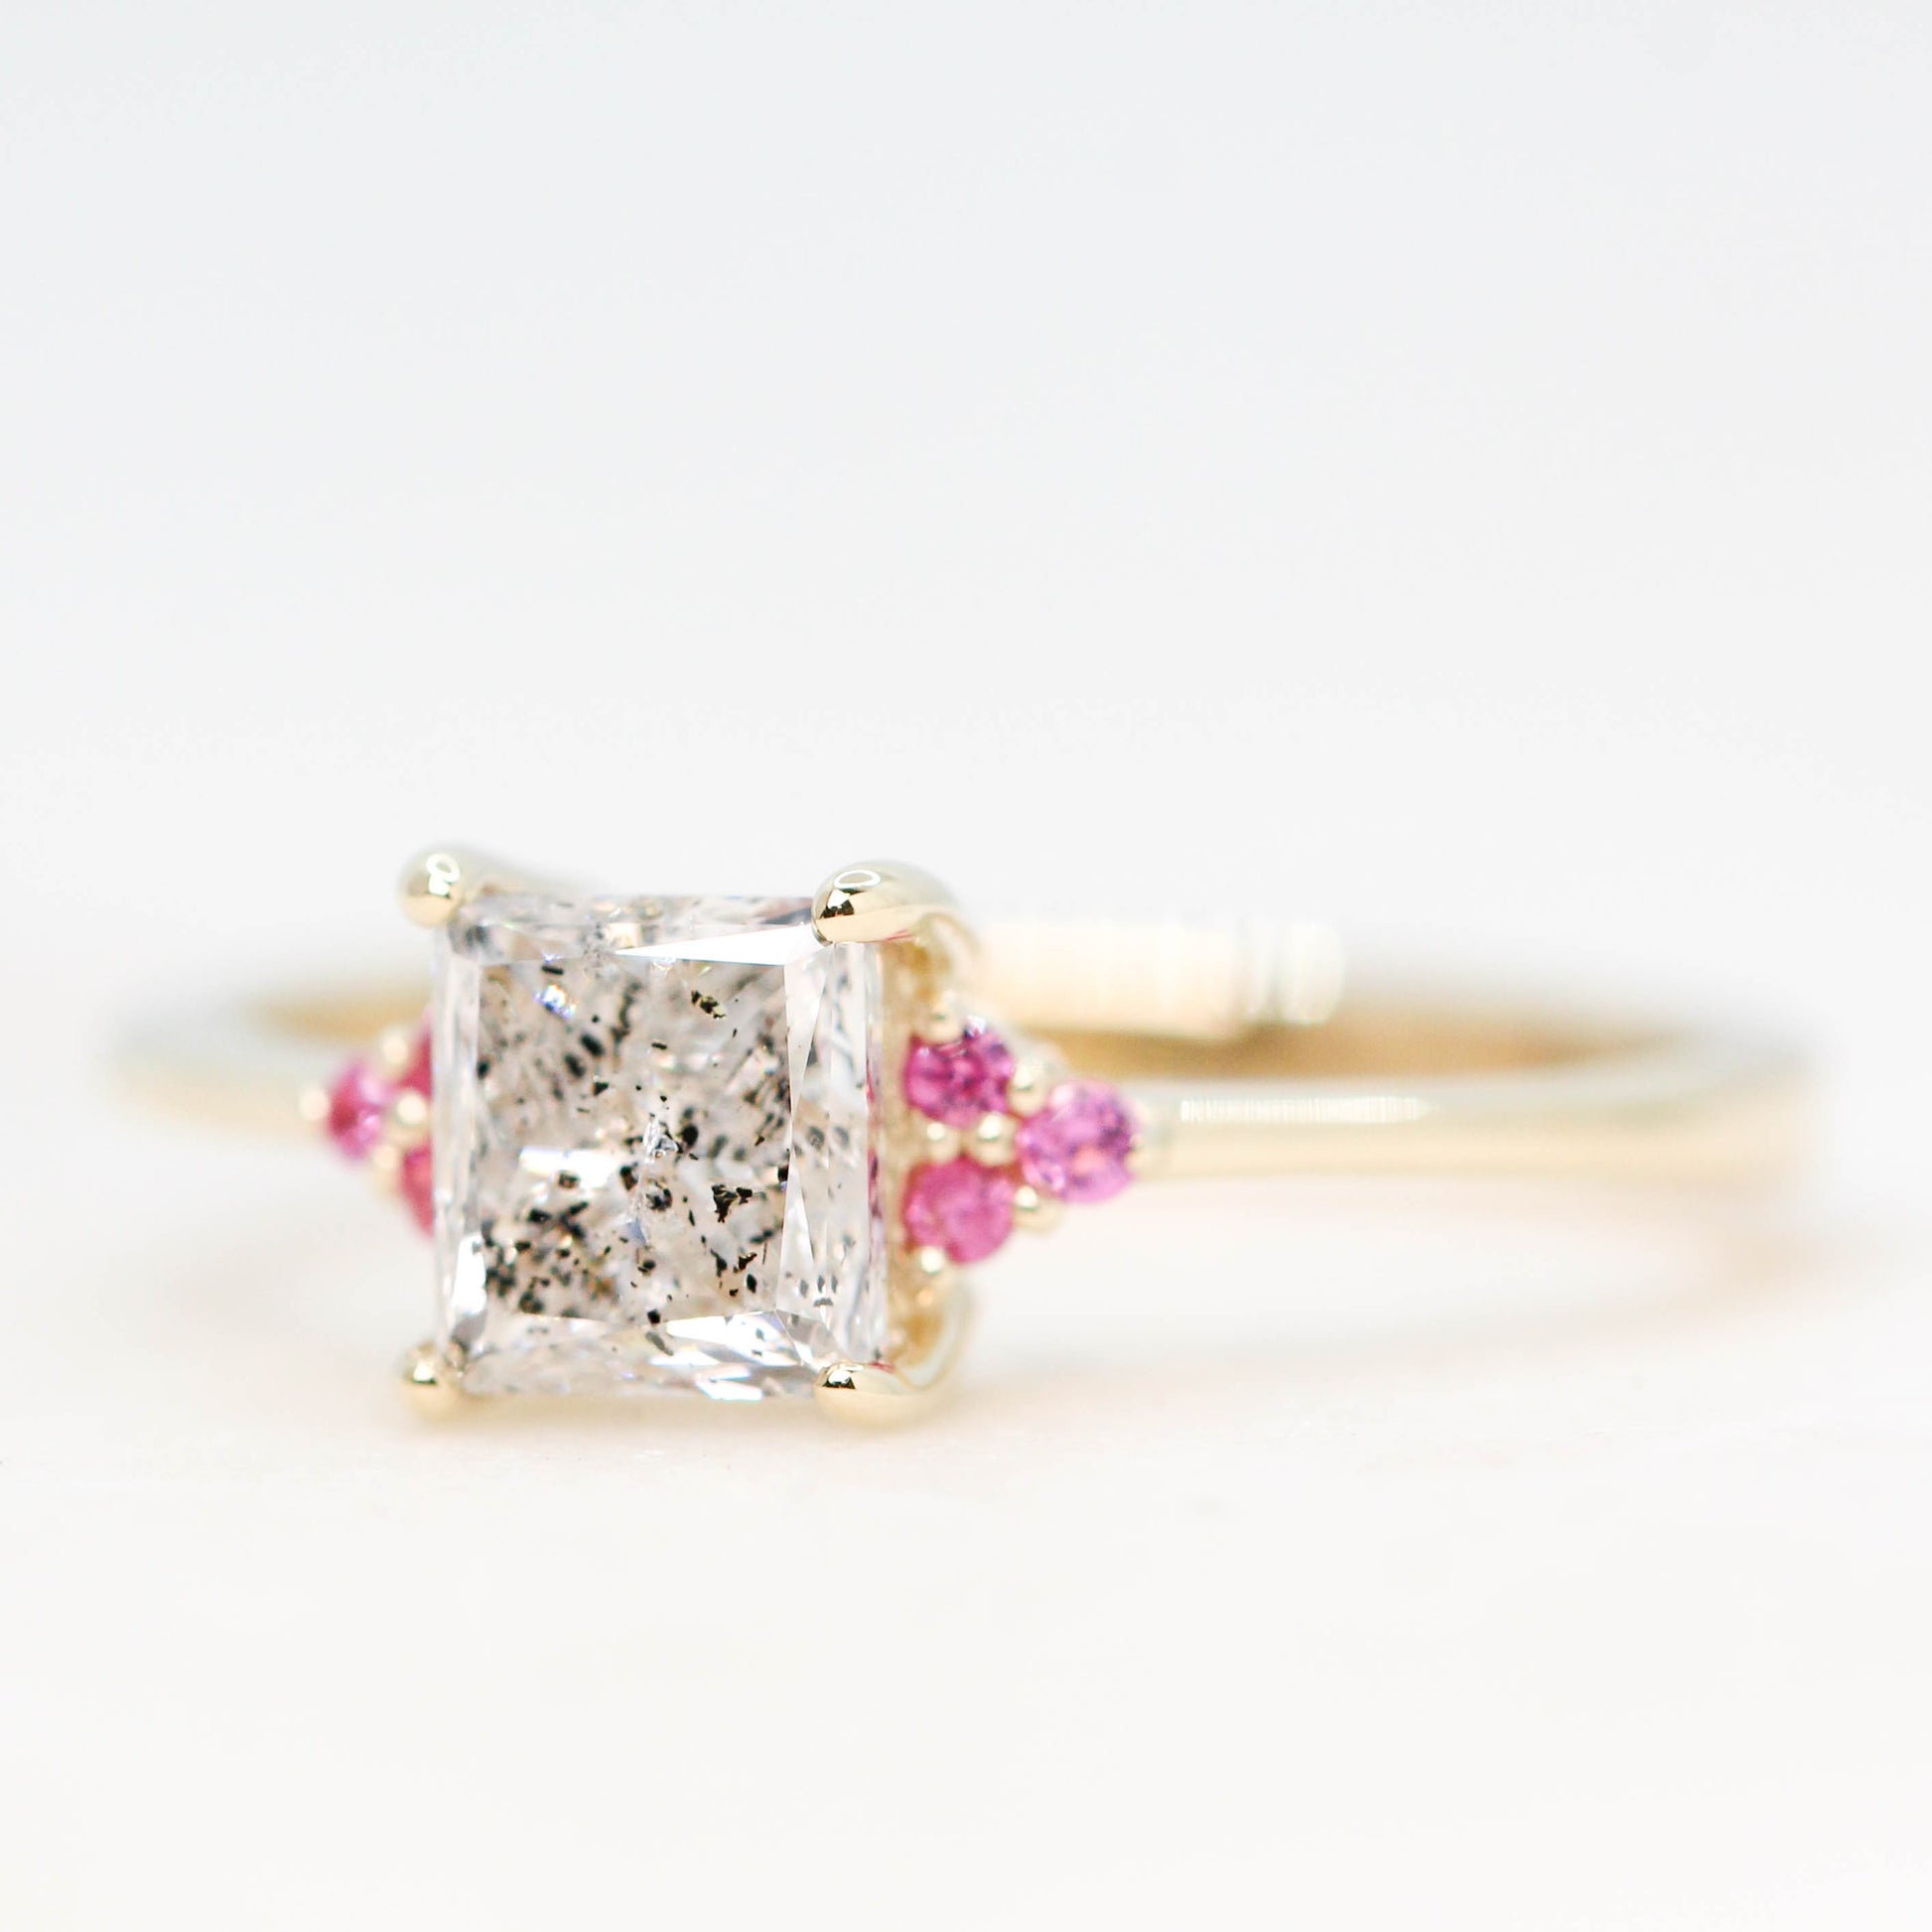 Imogene Ring with a 1.25 Carat Clear Celestial Princess Cut Diamond and Pink Accent Sapphires in 14k Yellow Gold - Ready to Size and Ship - Midwinter Co. Alternative Bridal Rings and Modern Fine Jewelry